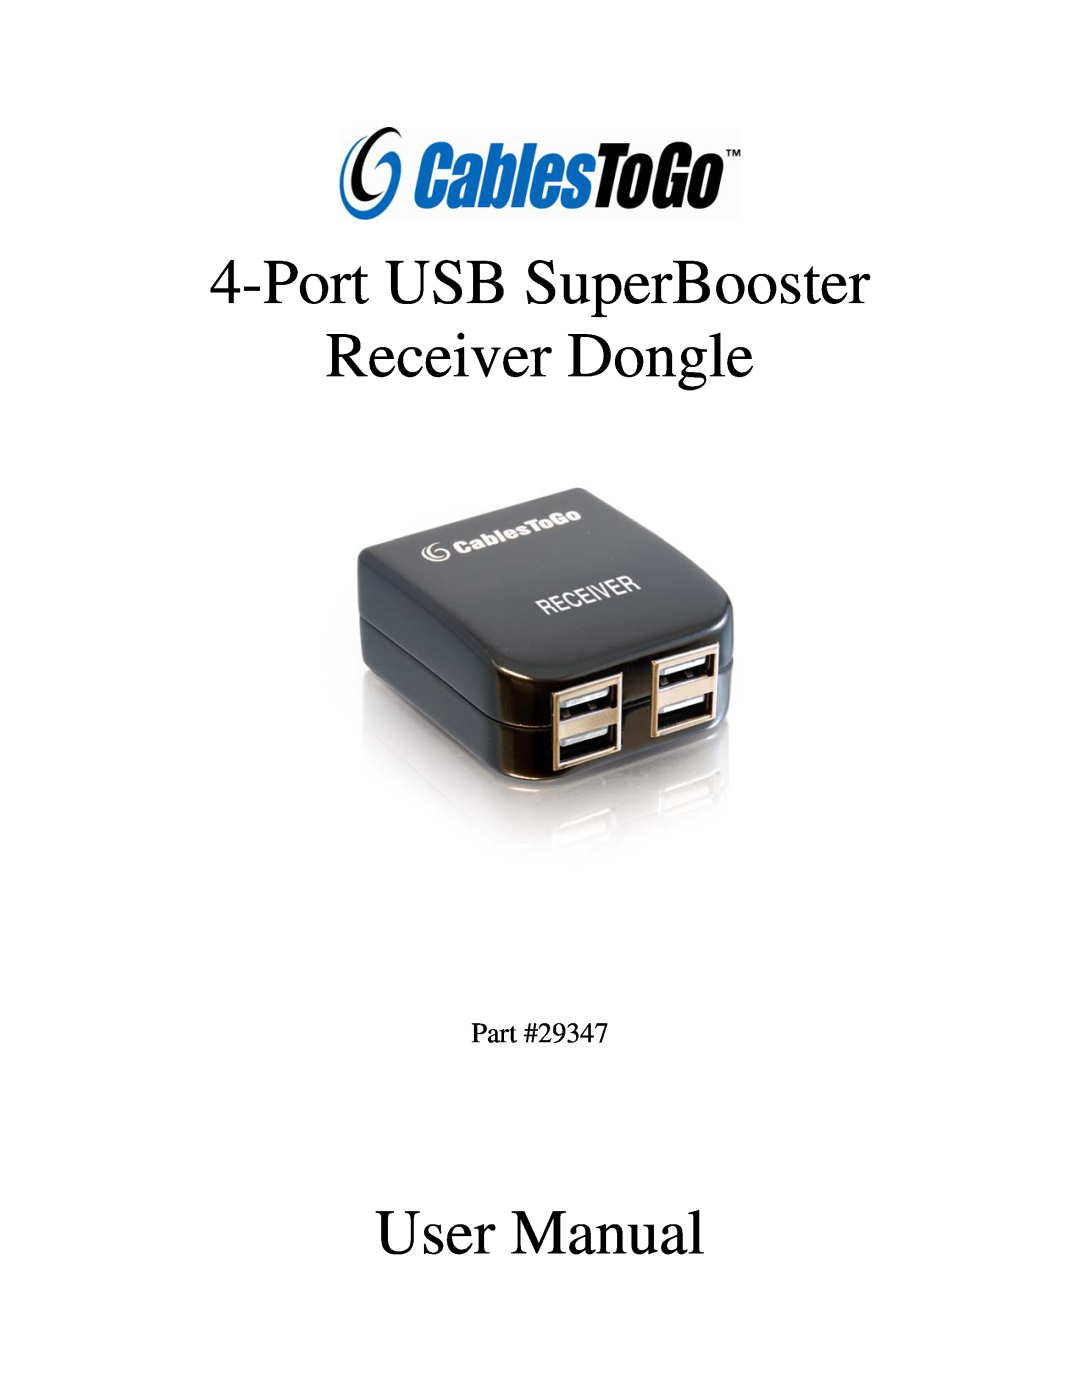 Cables to Go 29347 user manual Port USB SuperBooster Receiver Dongle, User Manual 